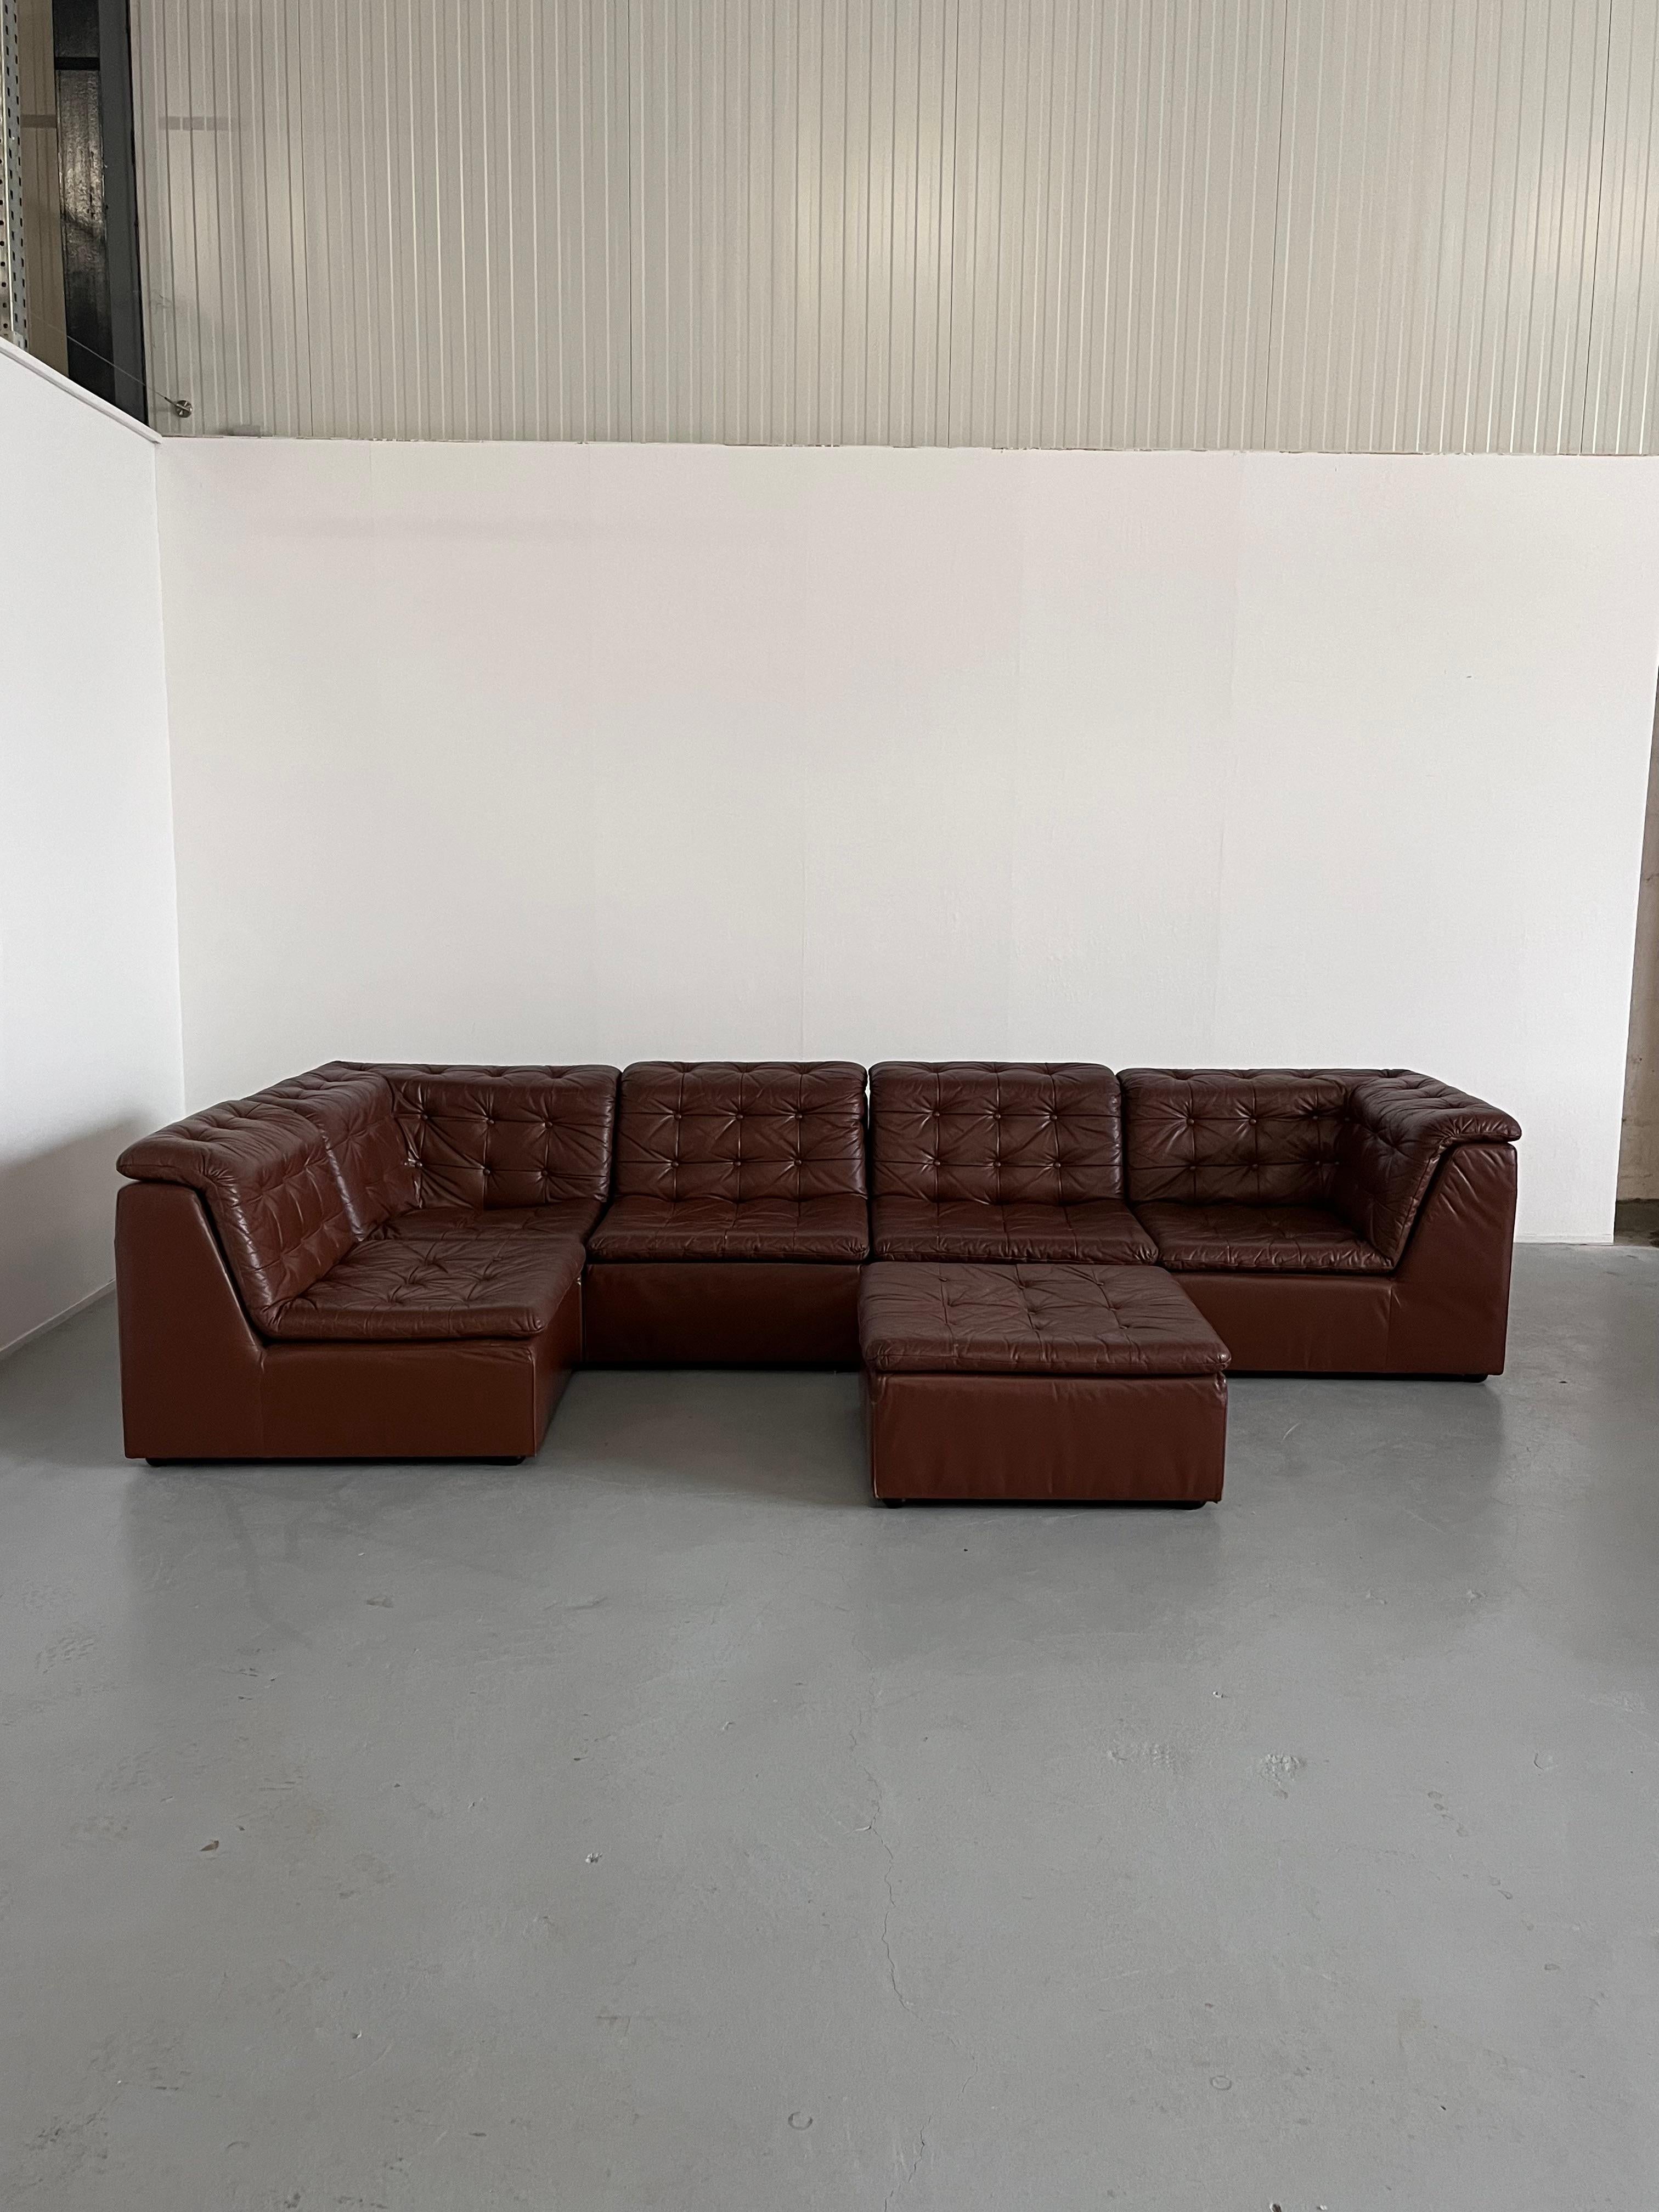 Mid-Century Modern Vintage Patchwork Cognac Leather Six-Part Modular Sofa by Laauser, 1970s Germany For Sale